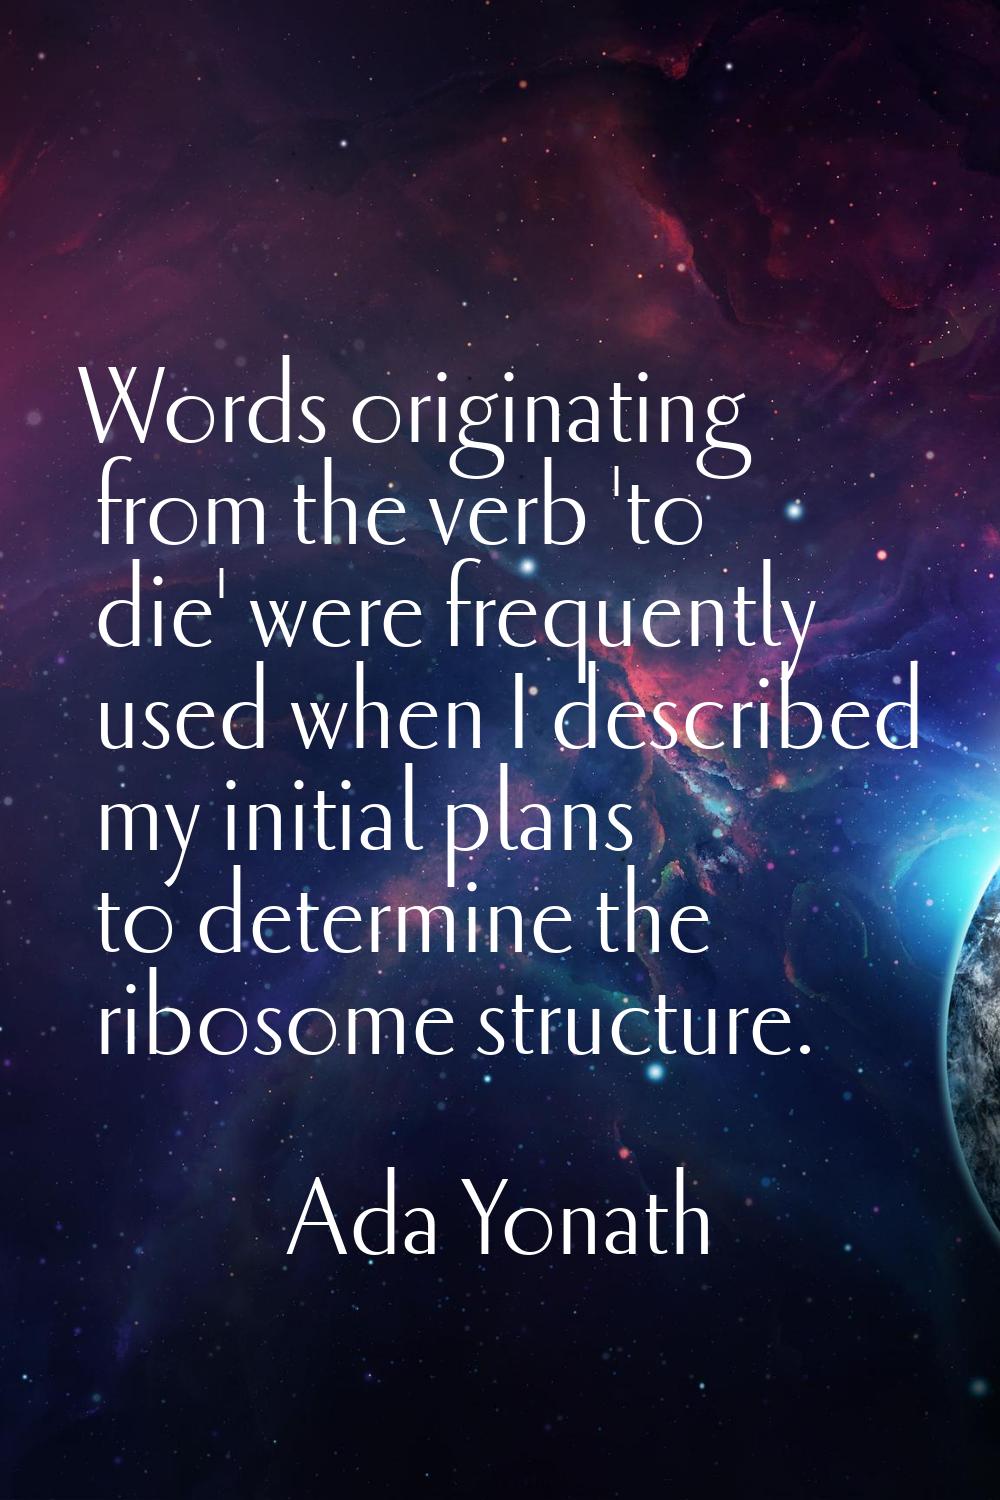 Words originating from the verb 'to die' were frequently used when I described my initial plans to 